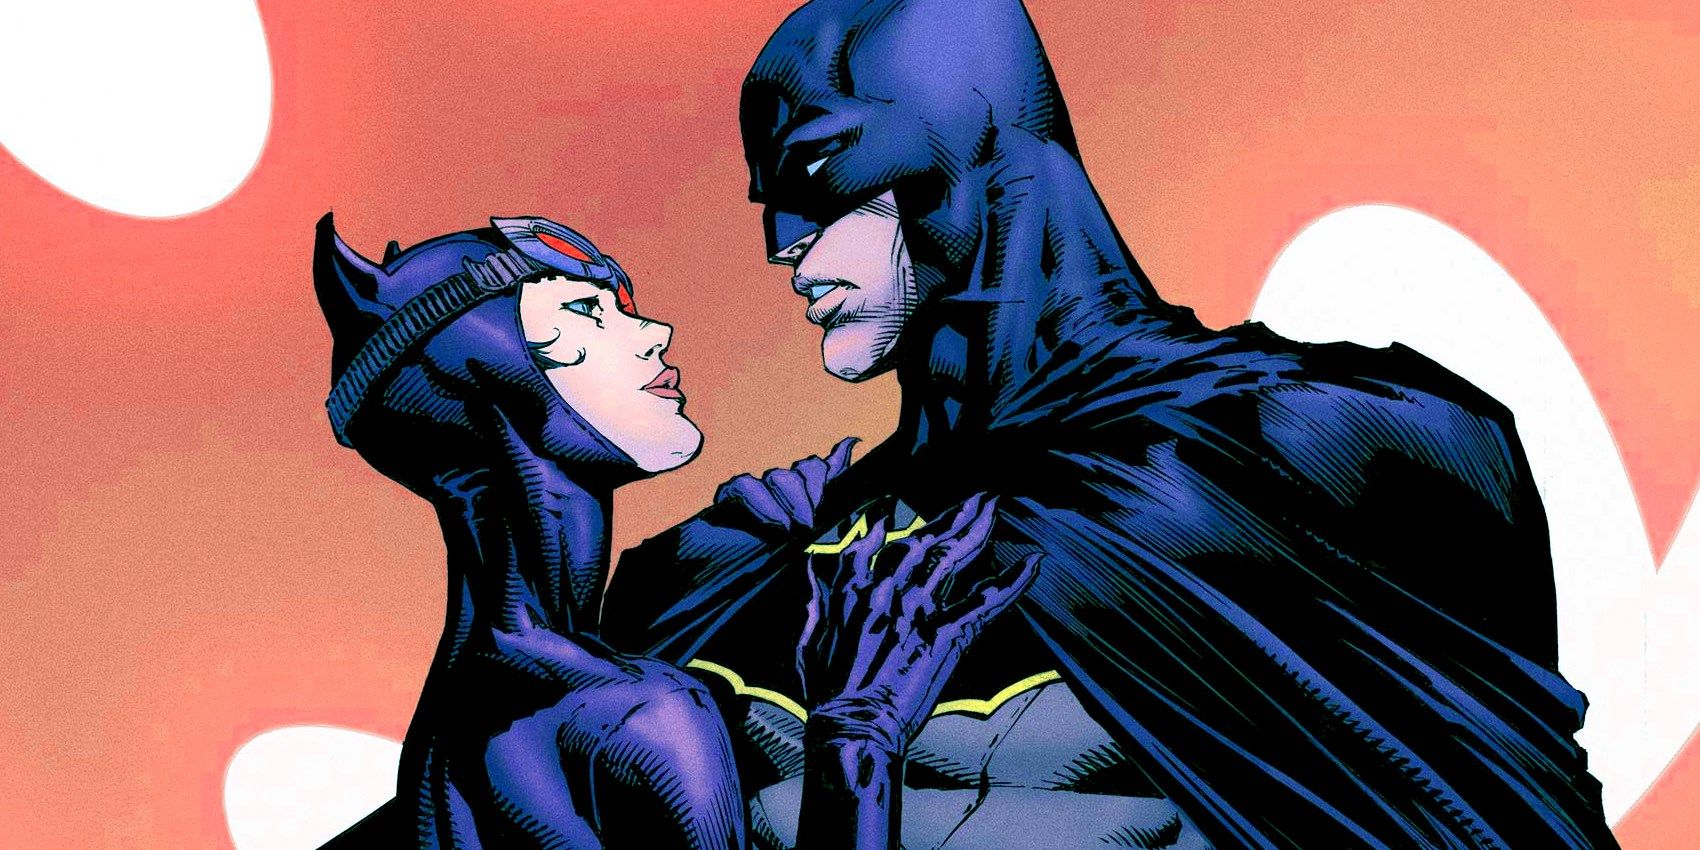 Batman and Catwoman looking at each other in DC Comics.